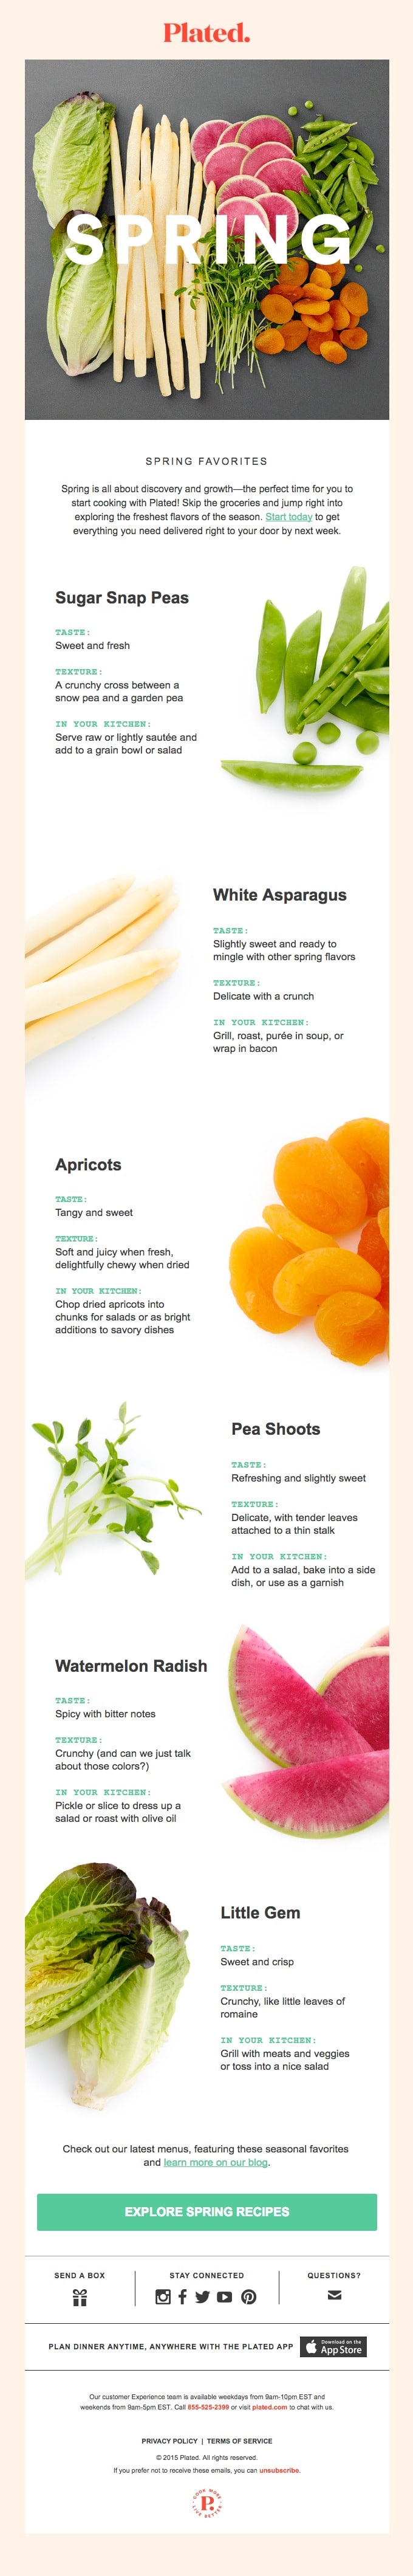 Spring produce email by Plated